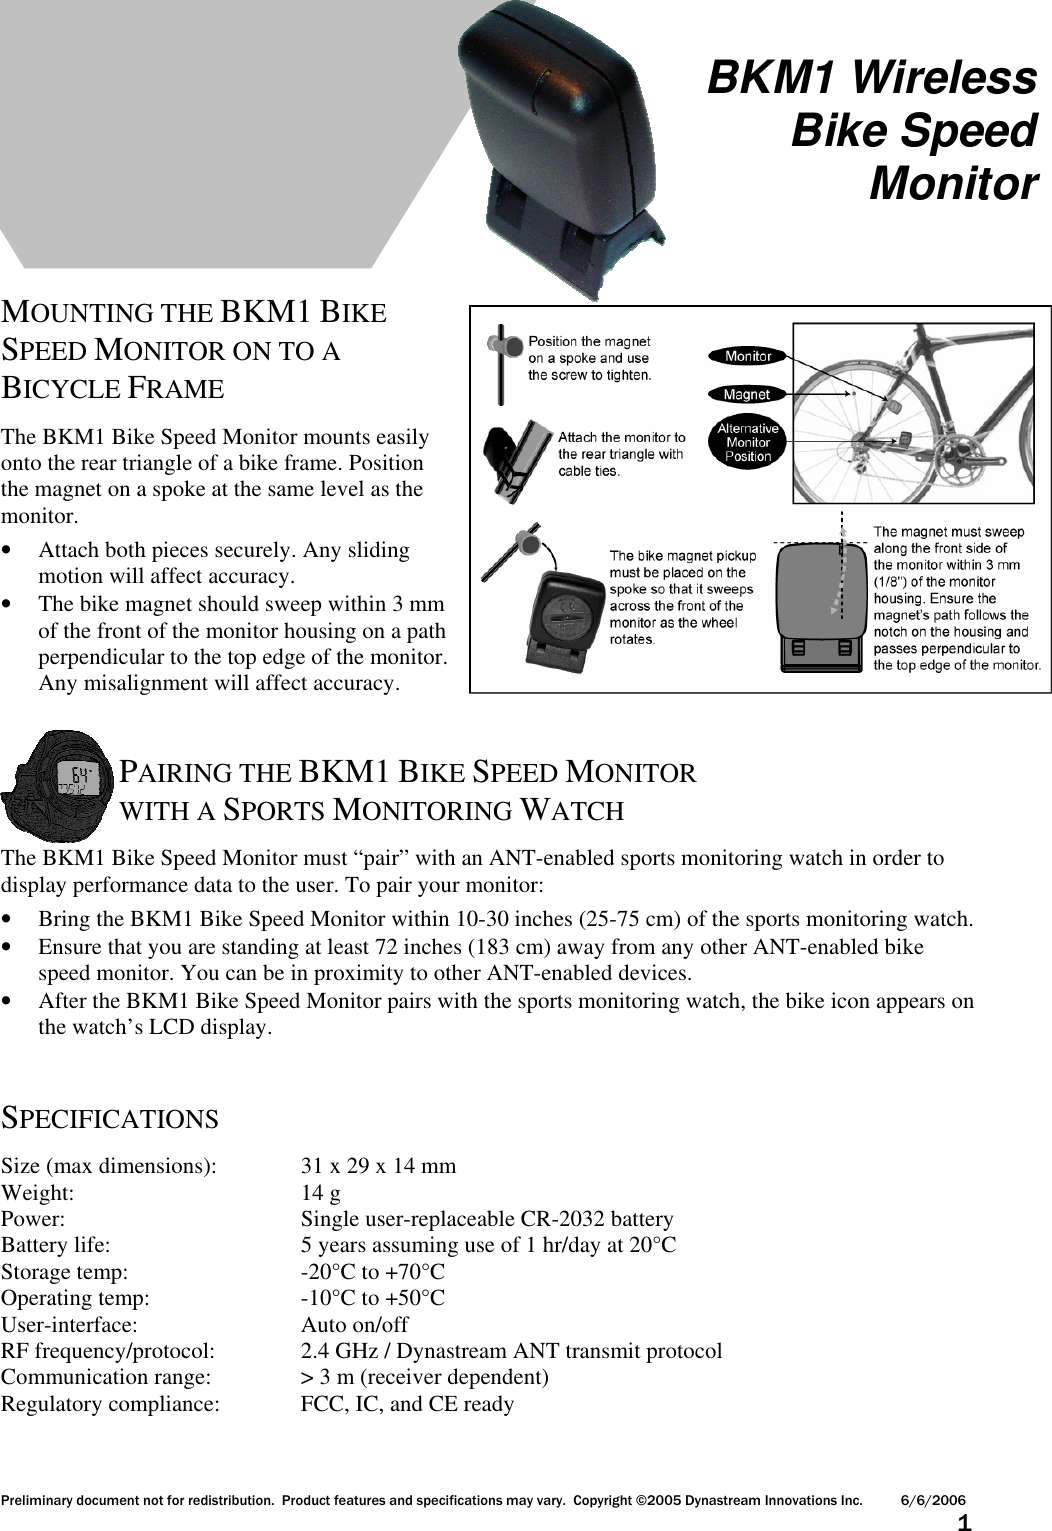 Preliminary document not for redistribution.  Product features and specifications may vary.  Copyright ©2005 Dynastream Innovations Inc. 6/6/2006                      1        MOUNTING THE BKM1 BIKE SPEED MONITOR ON TO A BICYCLE FRAME  The BKM1 Bike Speed Monitor mounts easily onto the rear triangle of a bike frame. Position the magnet on a spoke at the same level as the monitor. • Attach both pieces securely. Any sliding motion will affect accuracy.  • The bike magnet should sweep within 3 mm of the front of the monitor housing on a path perpendicular to the top edge of the monitor. Any misalignment will affect accuracy.   PAIRING THE BKM1 BIKE SPEED MONITOR WITH A SPORTS MONITORING WATCH  The BKM1 Bike Speed Monitor must “pair” with an ANT-enabled sports monitoring watch in order to display performance data to the user. To pair your monitor: • Bring the BKM1 Bike Speed Monitor within 10-30 inches (25-75 cm) of the sports monitoring watch. • Ensure that you are standing at least 72 inches (183 cm) away from any other ANT-enabled bike speed monitor. You can be in proximity to other ANT-enabled devices. • After the BKM1 Bike Speed Monitor pairs with the sports monitoring watch, the bike icon appears on the watch’s LCD display.   SPECIFICATIONS  Size (max dimensions):   31 x 29 x 14 mm Weight:       14 g Power:        Single user-replaceable CR-2032 battery Battery life:      5 years assuming use of 1 hr/day at 20°C Storage temp:      -20°C to +70°C Operating temp:     -10°C to +50°C User-interface:      Auto on/off RF frequency/protocol:    2.4 GHz / Dynastream ANT transmit protocol Communication range:    &gt; 3 m (receiver dependent) Regulatory compliance:   FCC, IC, and CE ready  BKM1 Wireless Bike Speed Monitor 